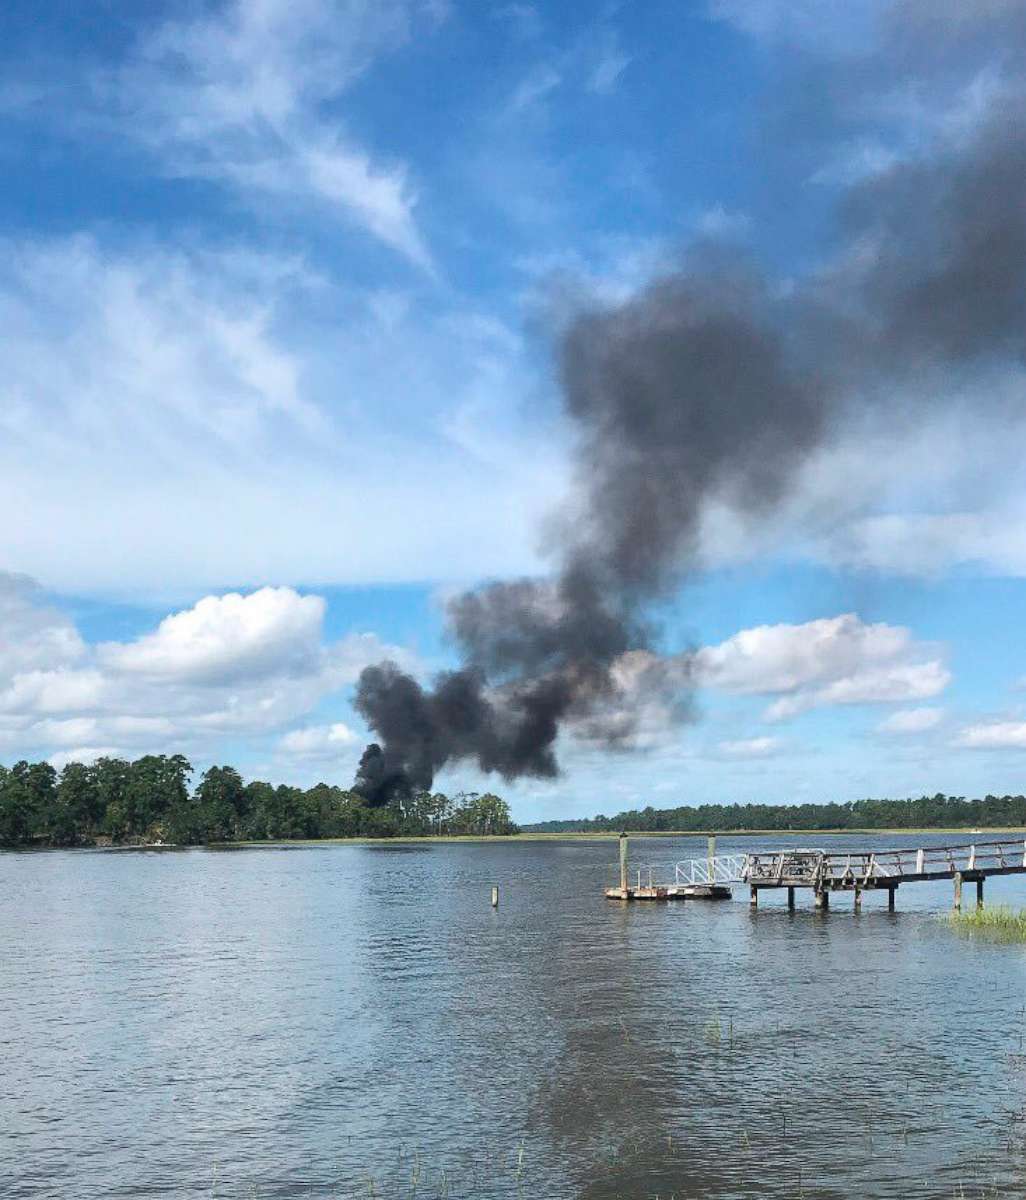 PHOTO: Smoke bellows from a military jet that crashed, Friday, Sept. 28, 2018 in Beaufort, S.C.